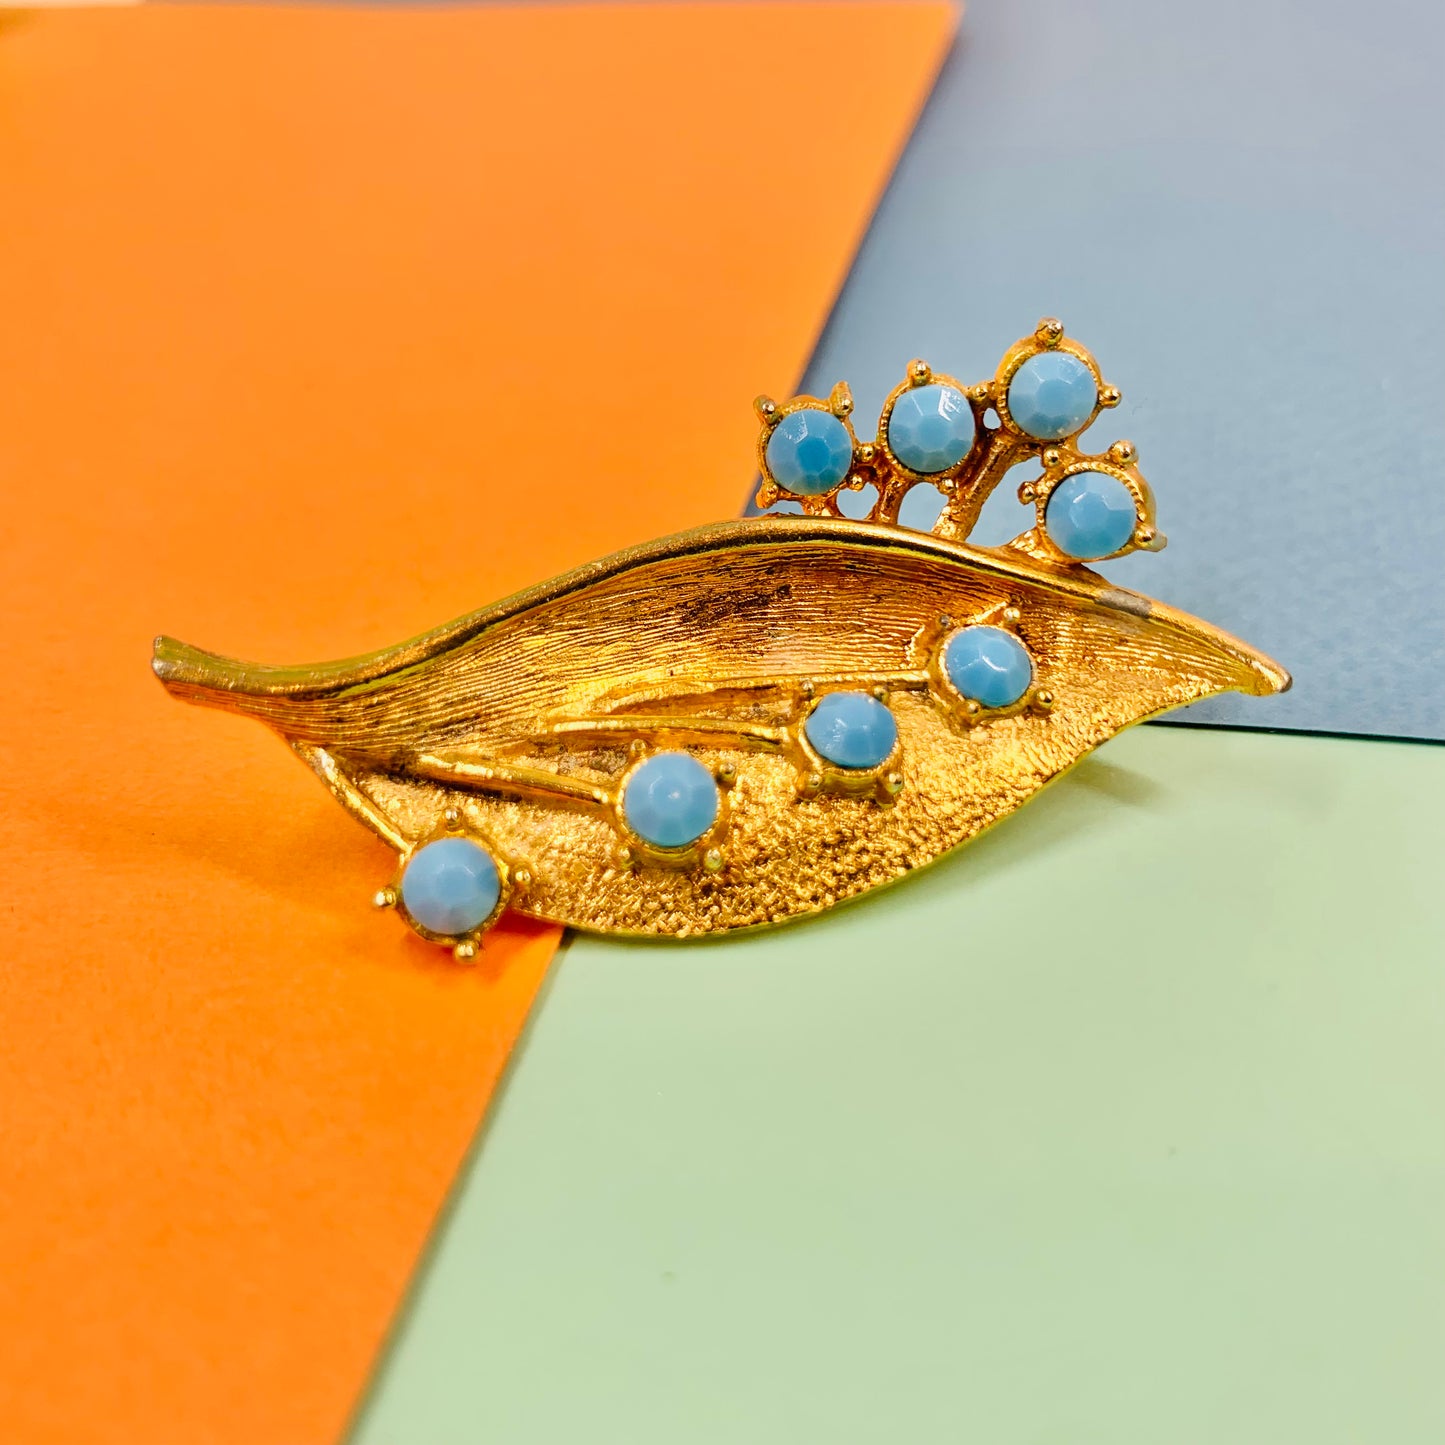 1970s plated alloy leaf brooch with turquoise beads